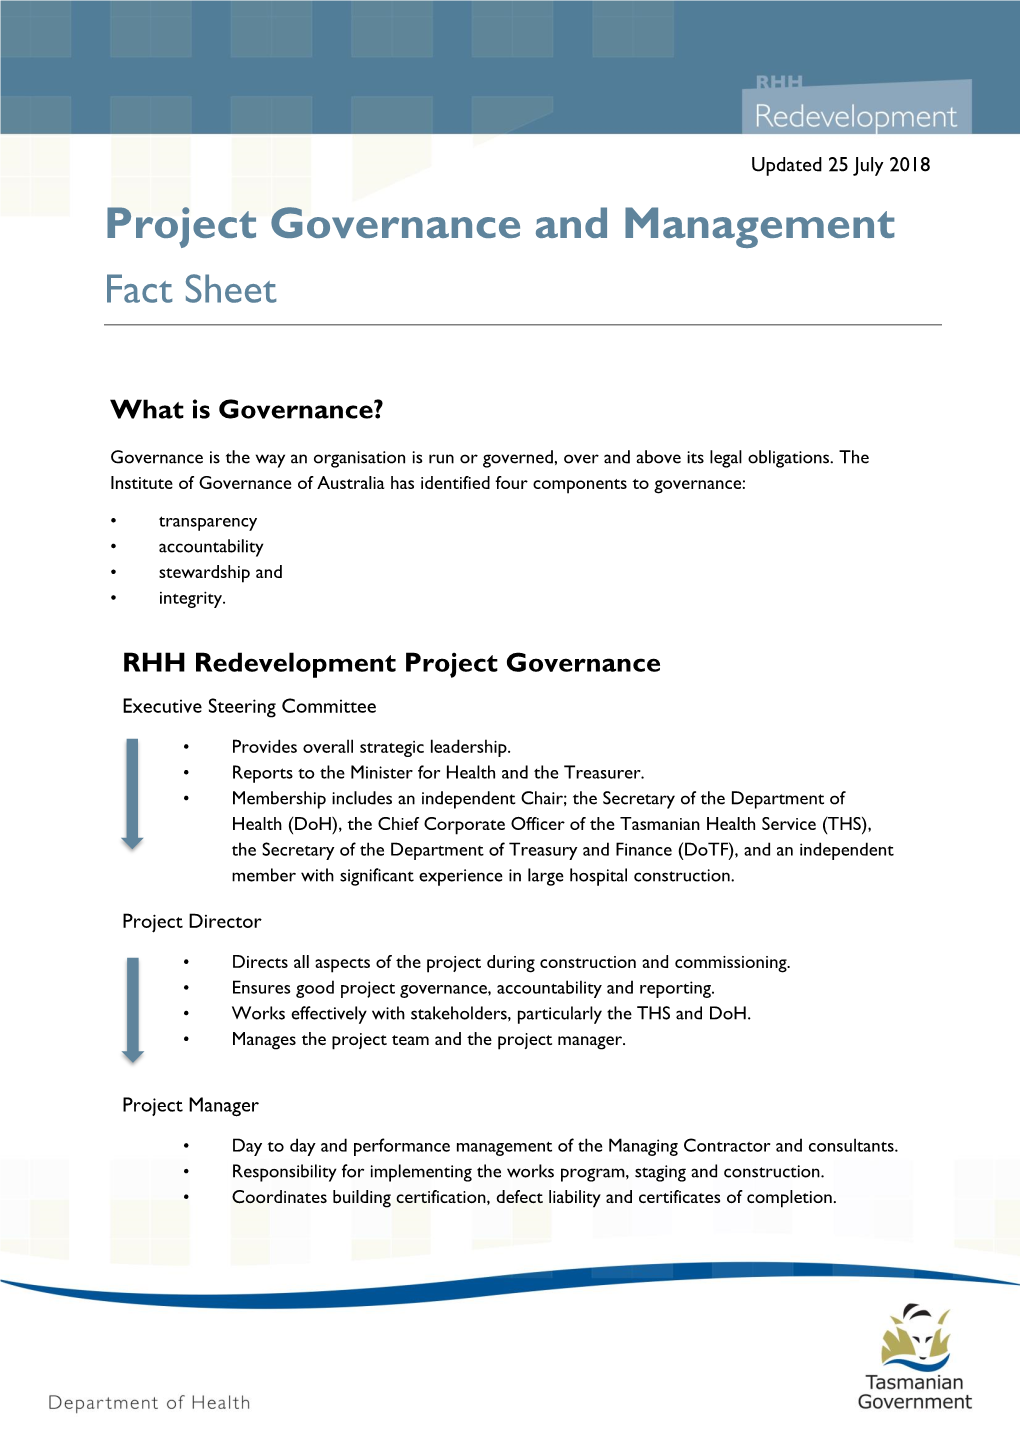 Project Governance and Management